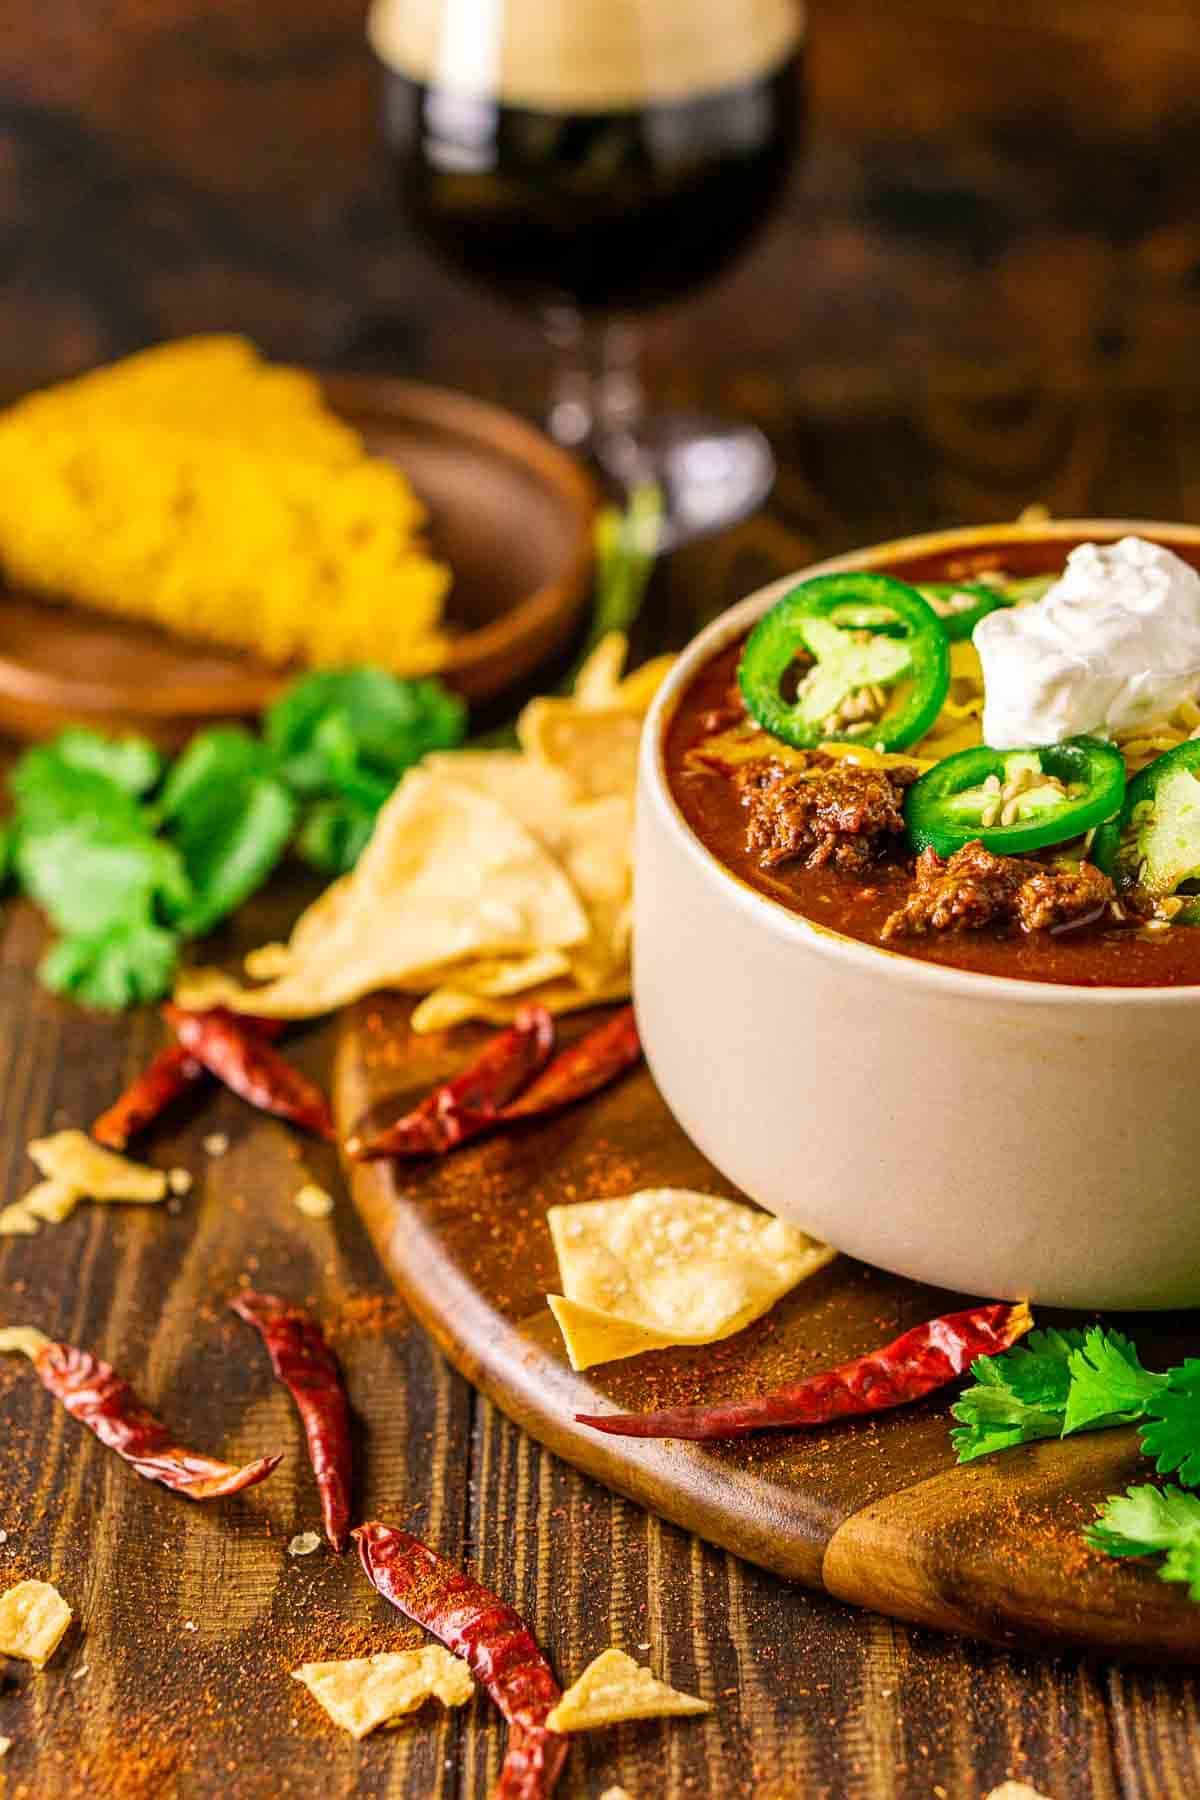 A cream-colored bowl full of the venison chili on a brown wooden plate with crushed tortilla chips and dried chiles surrounding it.